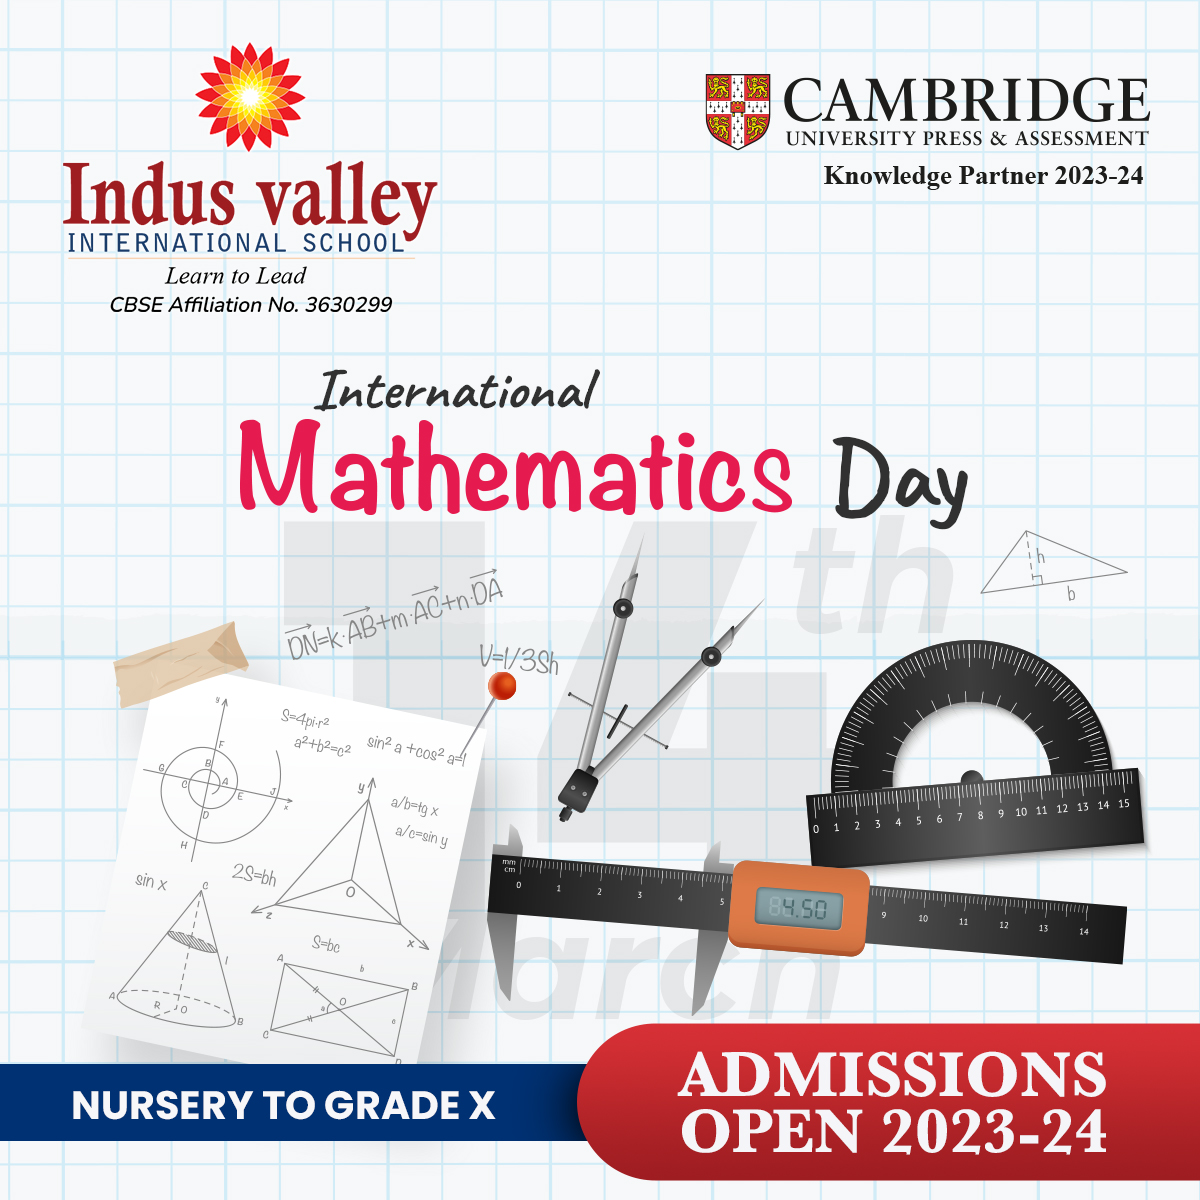 𝐇𝐚𝐩𝐩𝐲 𝐈𝐧𝐭𝐞𝐫𝐧𝐚𝐭𝐢𝐨𝐧𝐚𝐥 𝐌𝐚𝐭𝐡𝐬 𝐃𝐚𝐲!  Let's celebrate the beauty, complexity, and practicality of mathematics in our daily lives.

🌐indusvalleyinternationalschool.com

#IVIS #InternationalMathematicsDay #MathematicsDay #PiDay #LearnMath